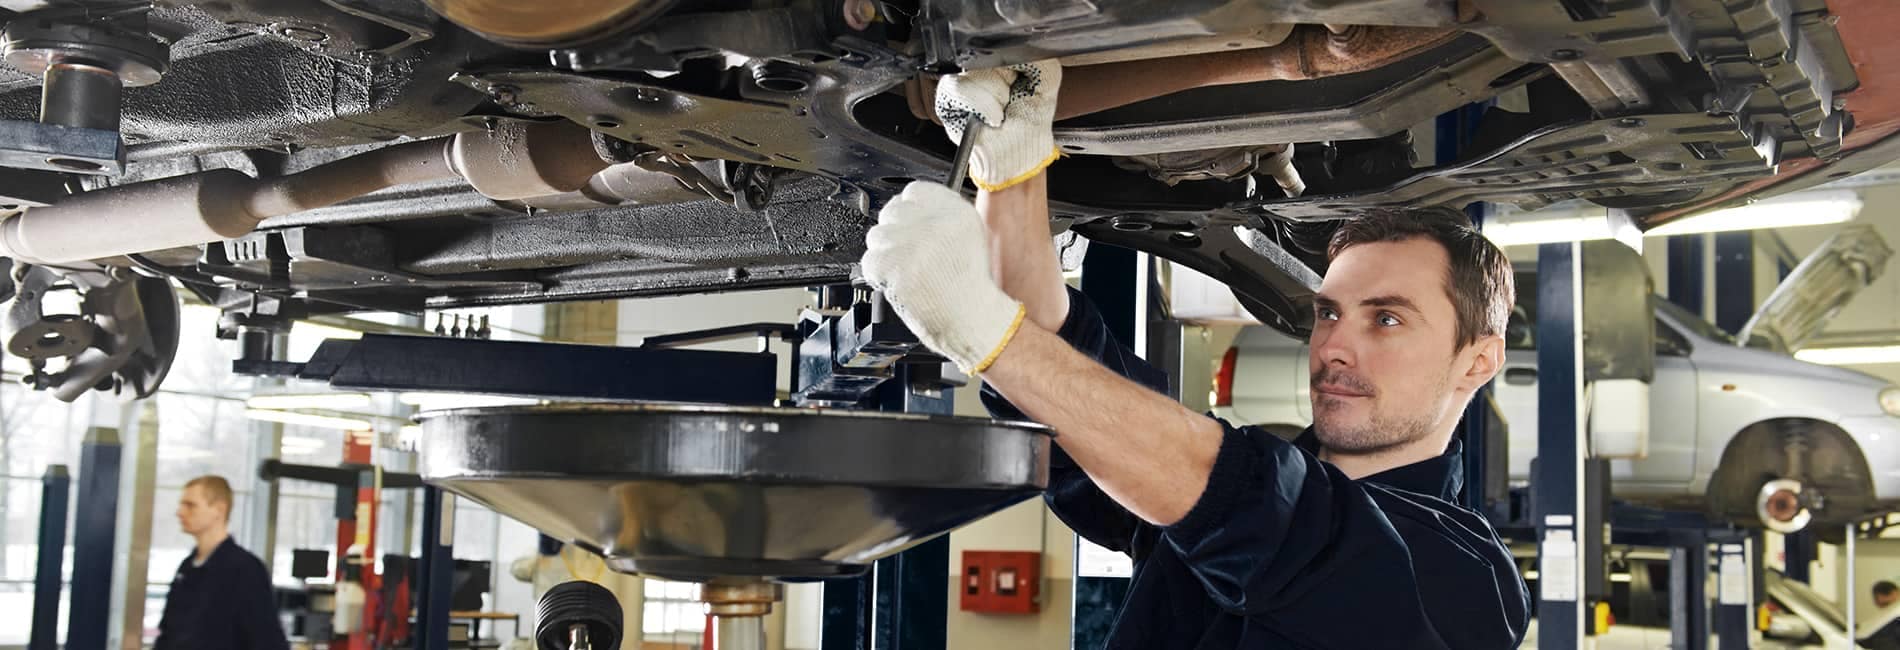 Service picture of technician working on the underside of car in service bay of raised cars